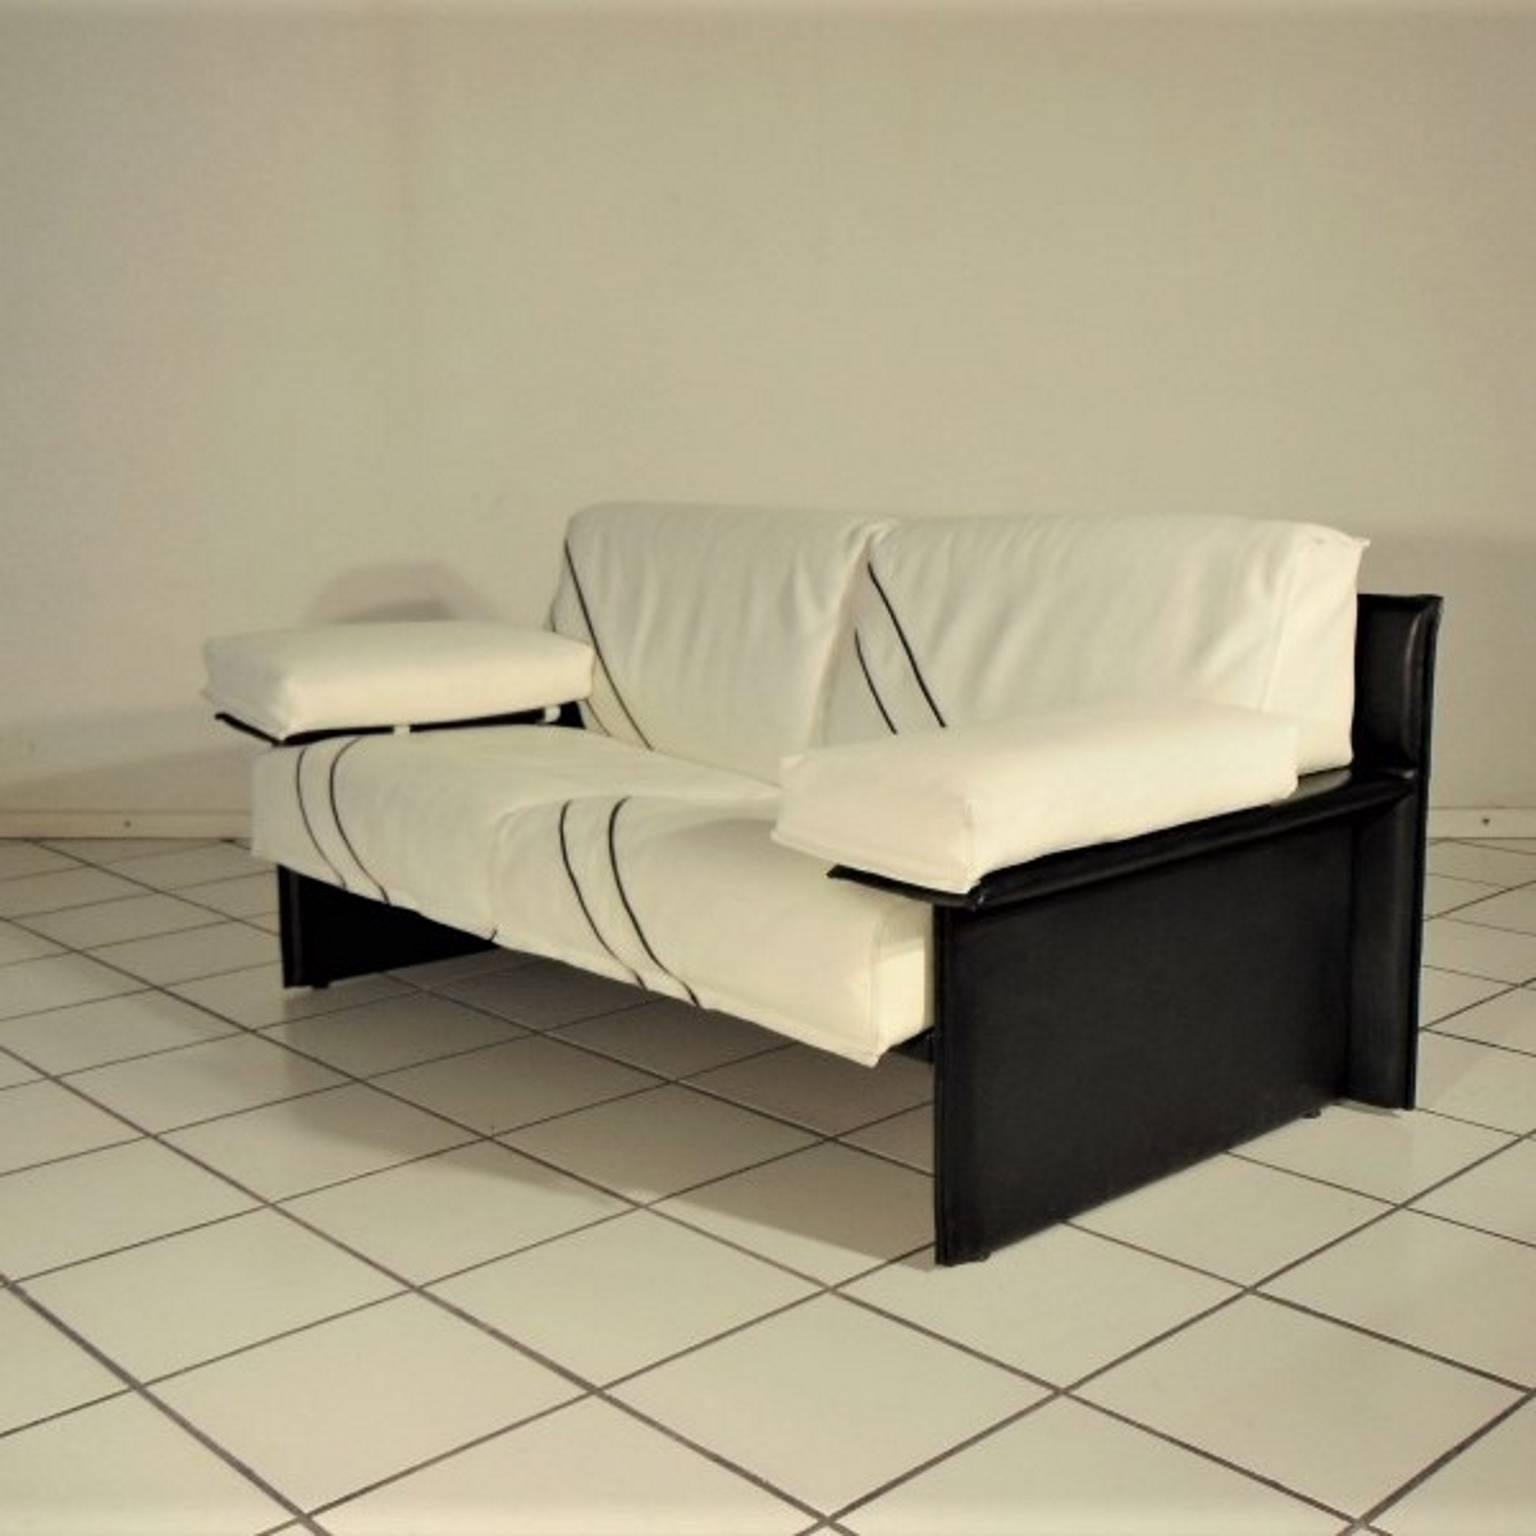 1981 Sormani White Leather Two-Seater Sofa with Black Inlays and Structure Italy (Gefärbt)